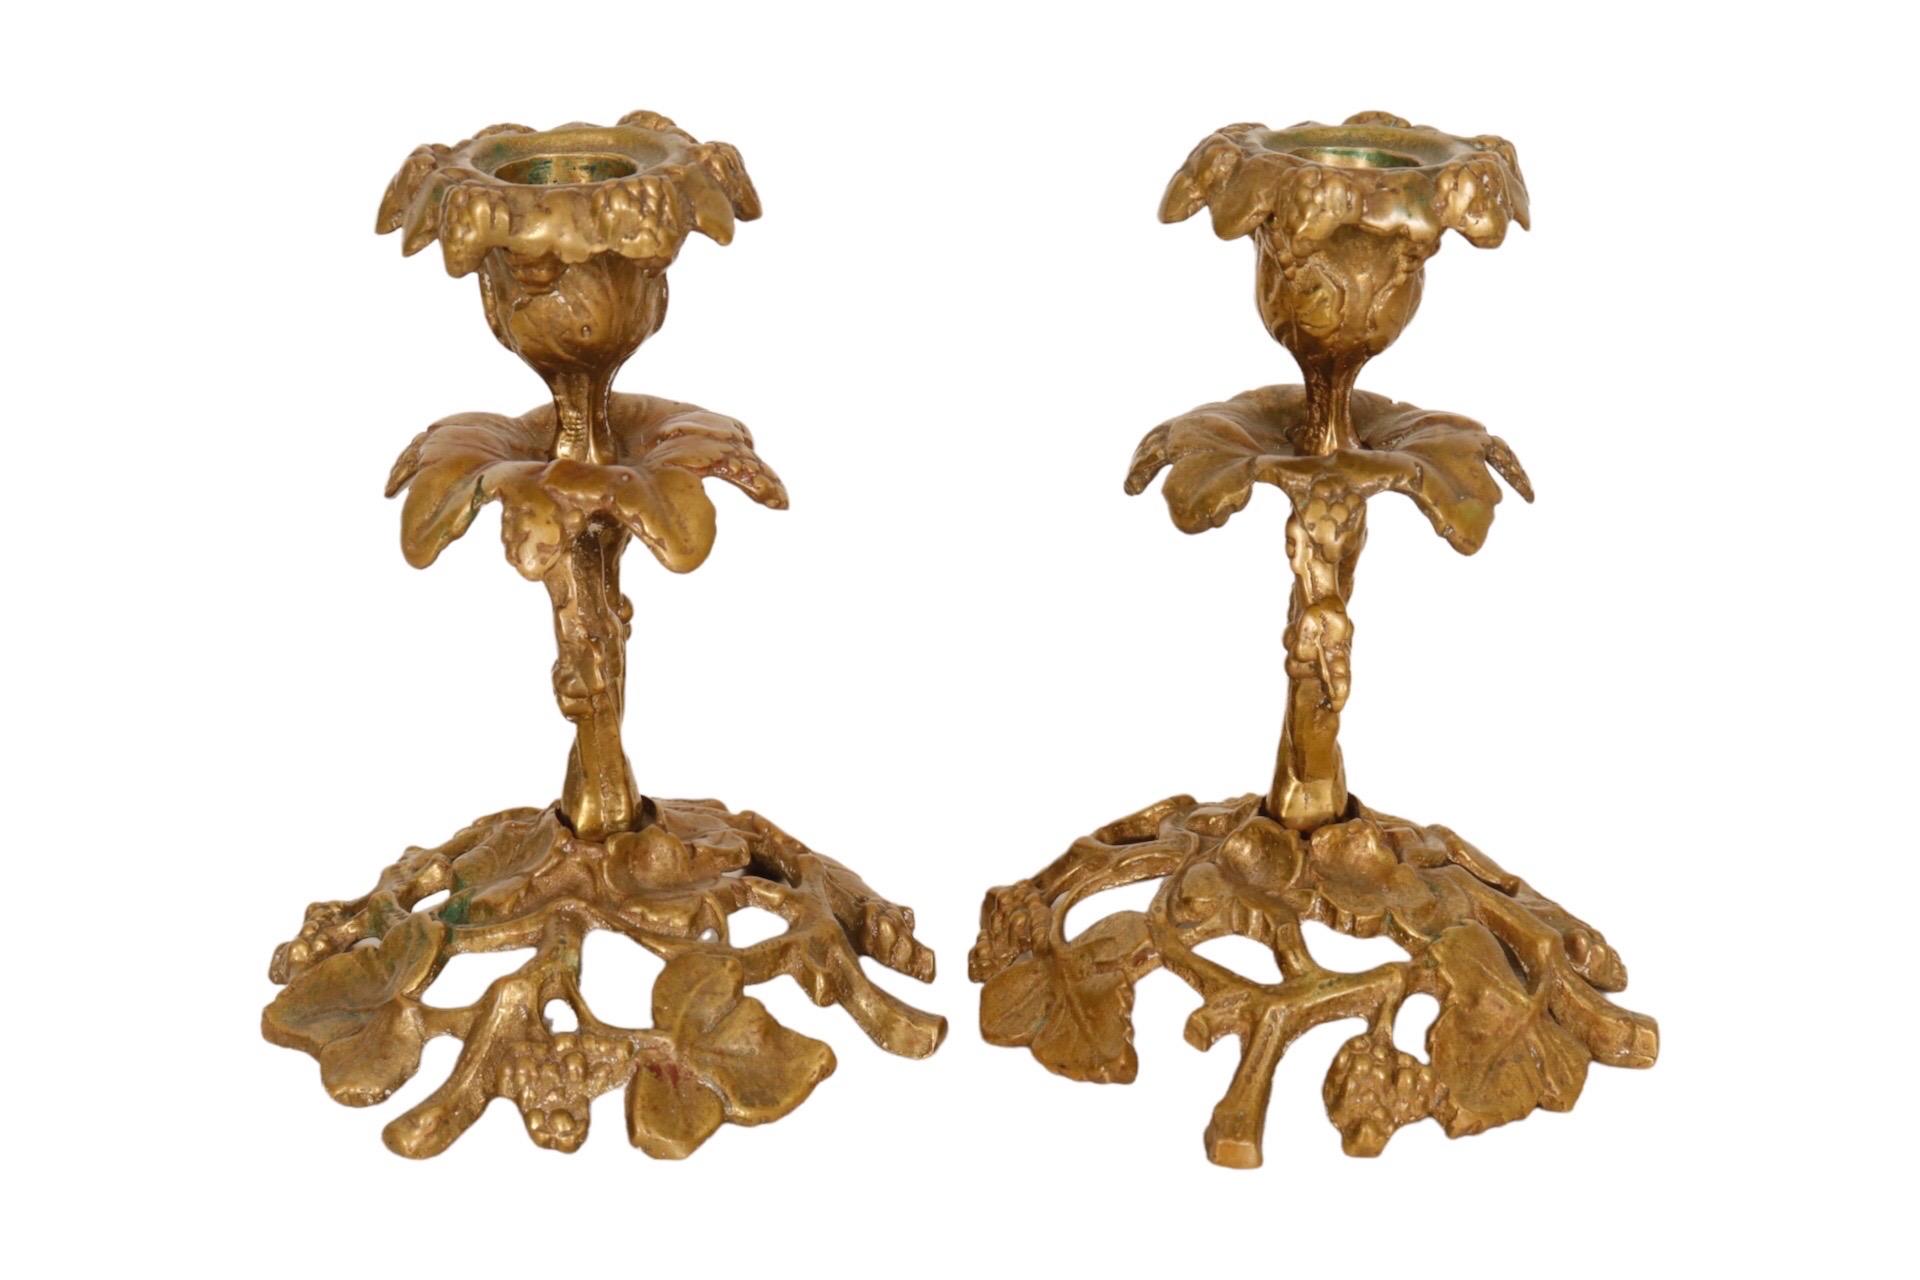 A pair of brass Glo-Mar Artworks of NY candlesticks in the form of twisting grape vines. The capital, stem and base are separate pieces cast in an intricate pierced design with vine leaves and grape bunches throughout. The candlesticks are stamped